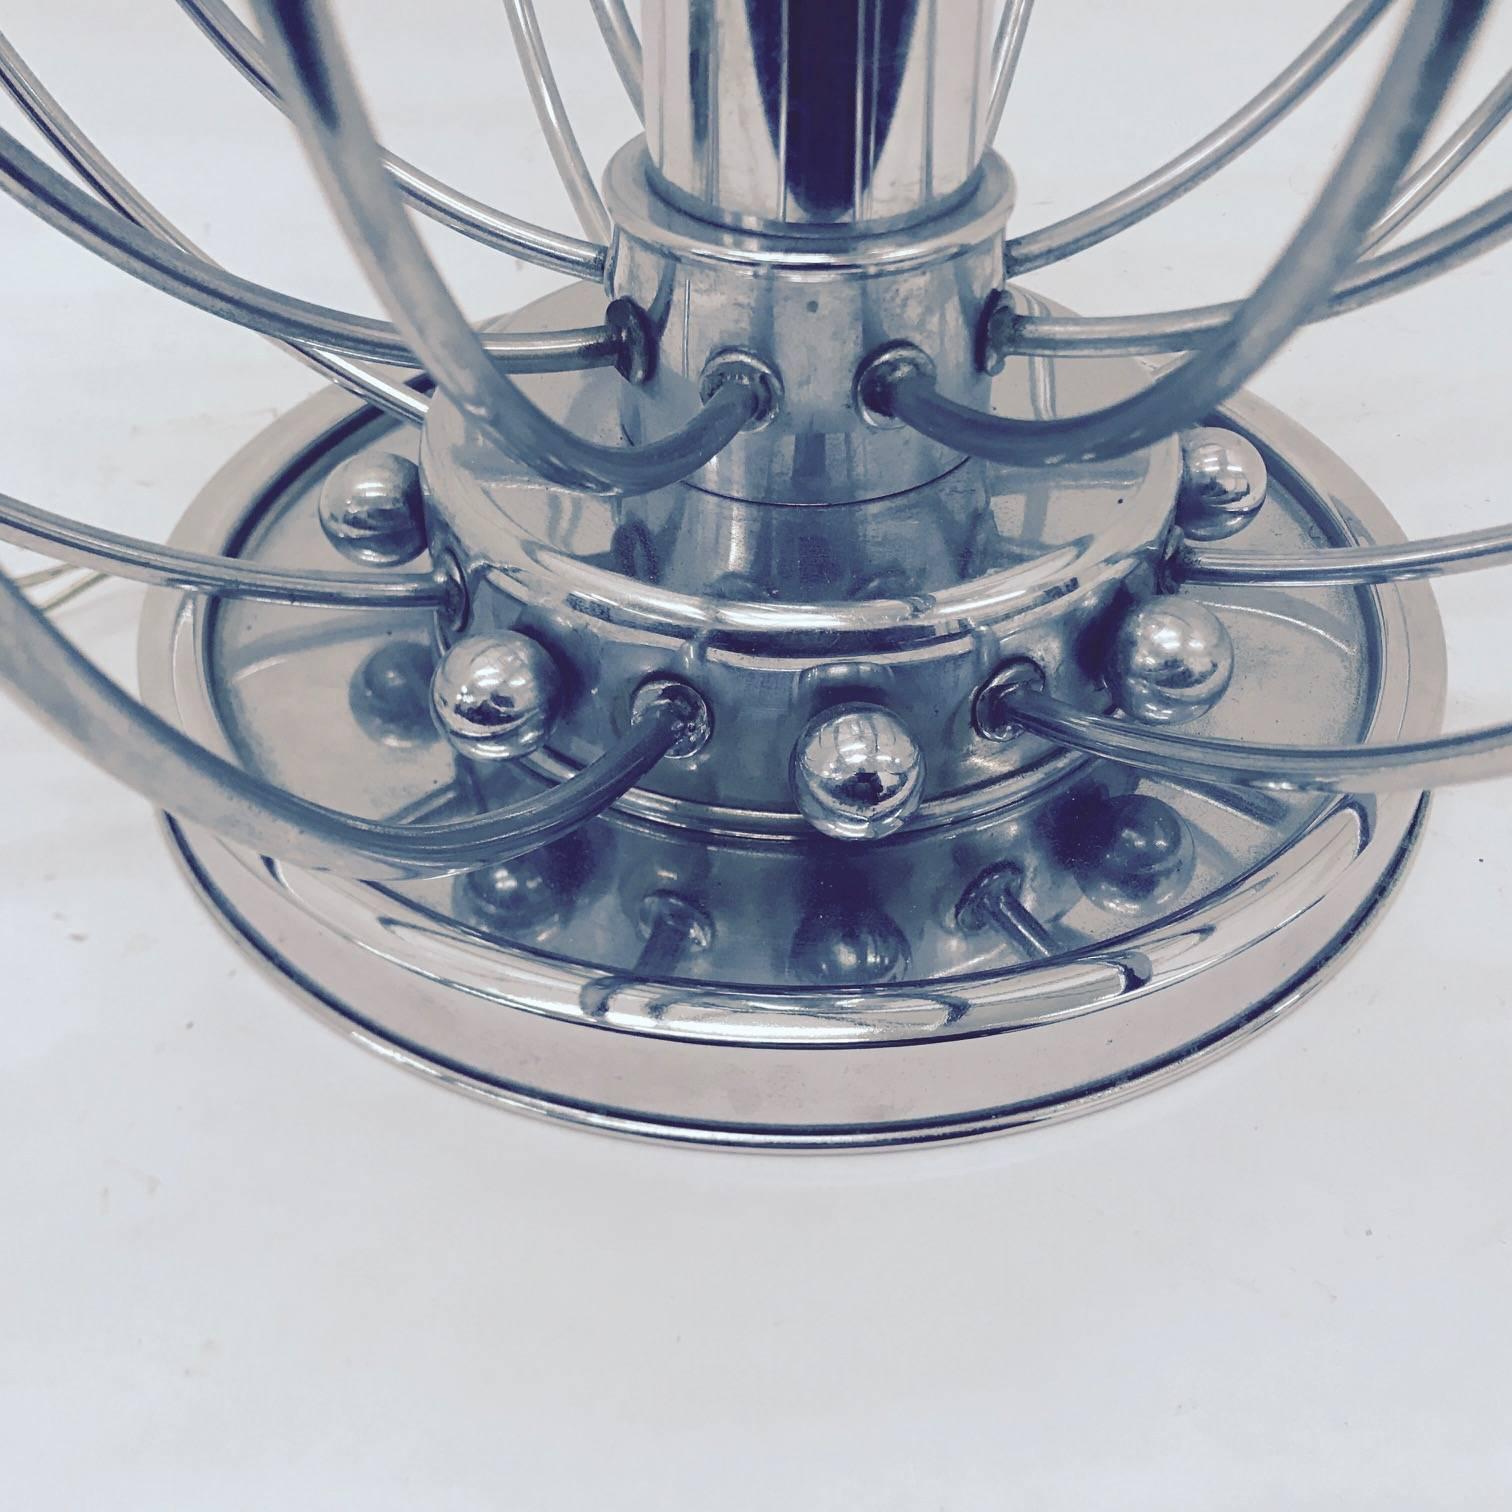 1970s Rare Space Age Chromed Italian Table Lamp in the style of Pistillo Lamp For Sale 2